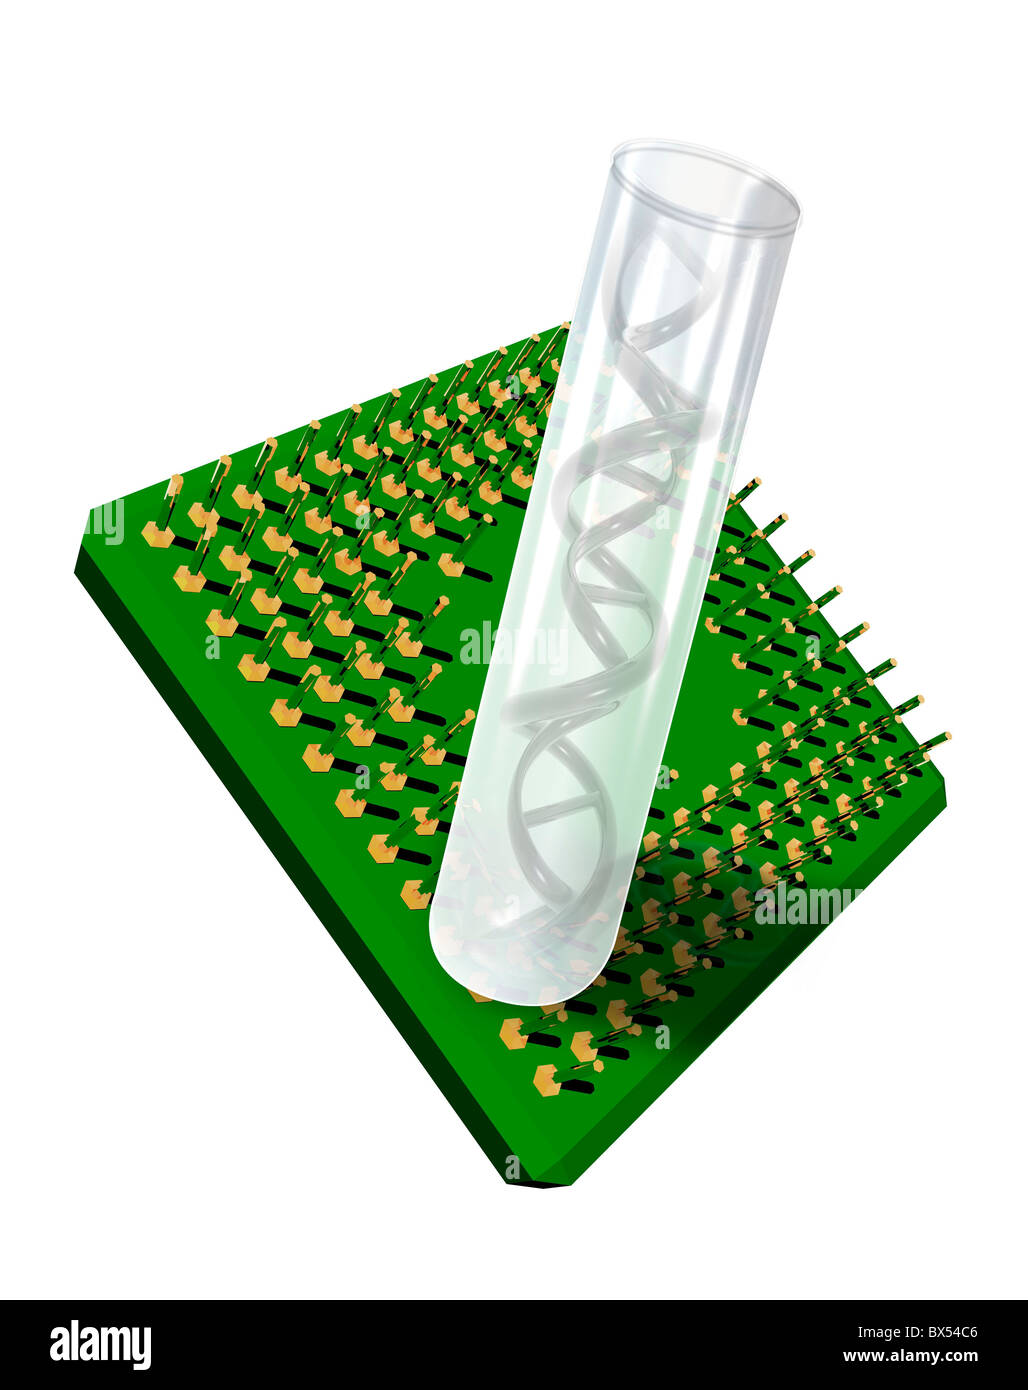 Lab-on-a-chip, conceptual artwork Stock Photo